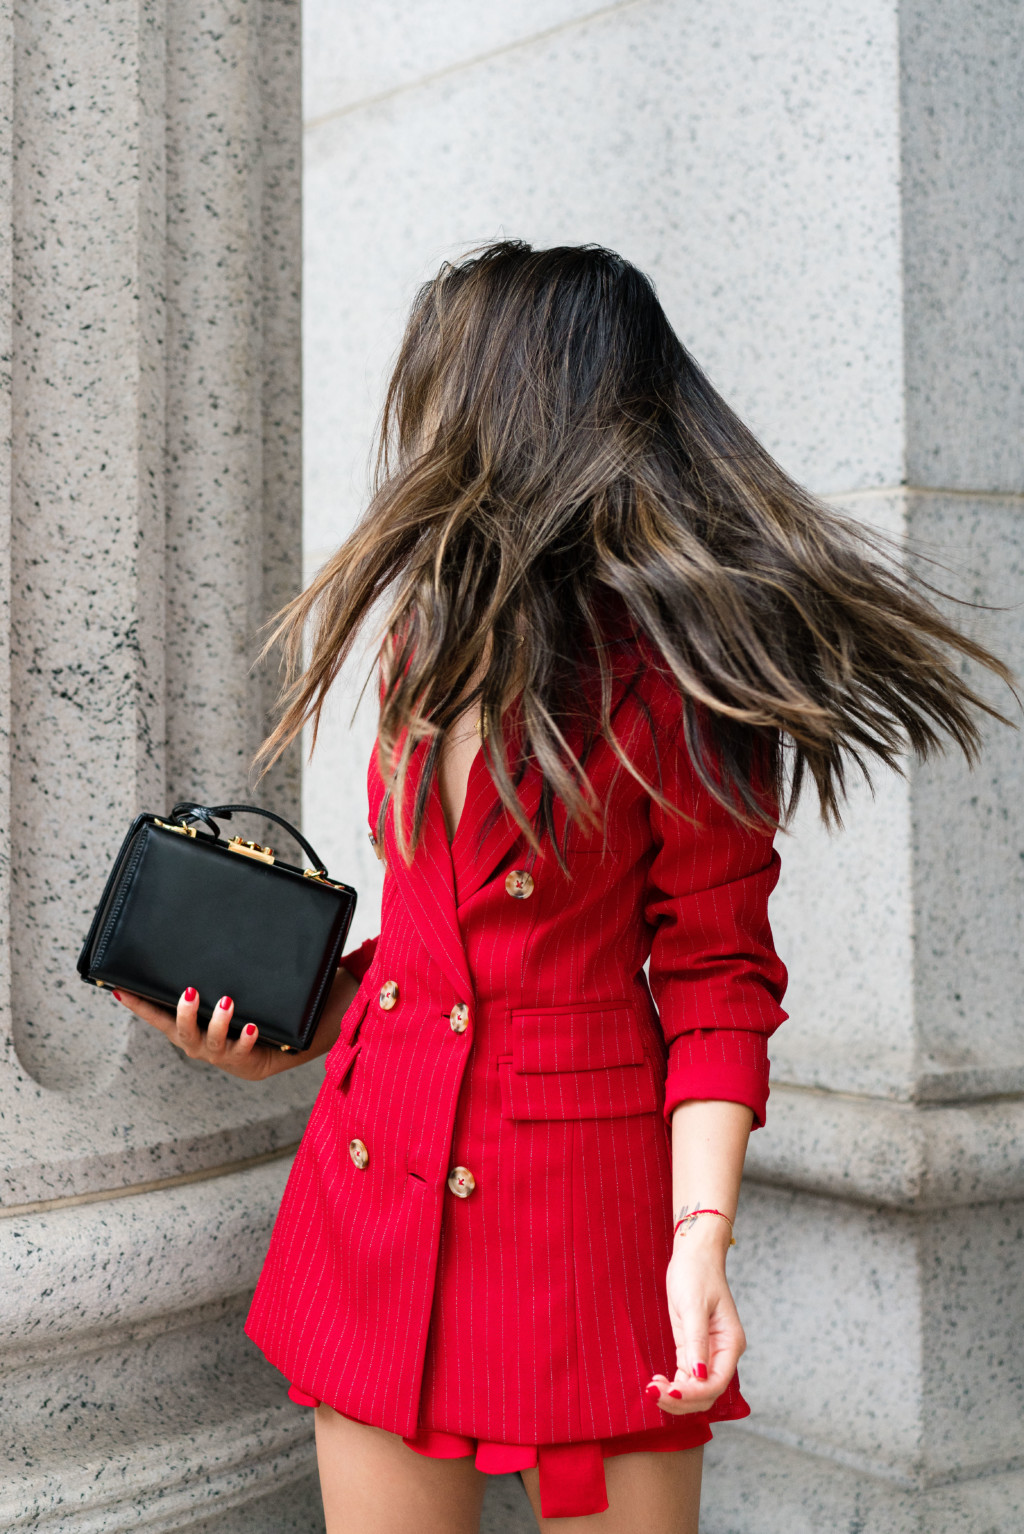 Lia stylist - Red suit is always a good idea 🌹 @blanchetteconceptstore  #newseason #newcollection #ss21 #classy #chic #fashion #suit #streetstyle  #fashionstyle #ootd #fashioninspiration #fashioninfluencer Ph  @billpatrick1964 📷